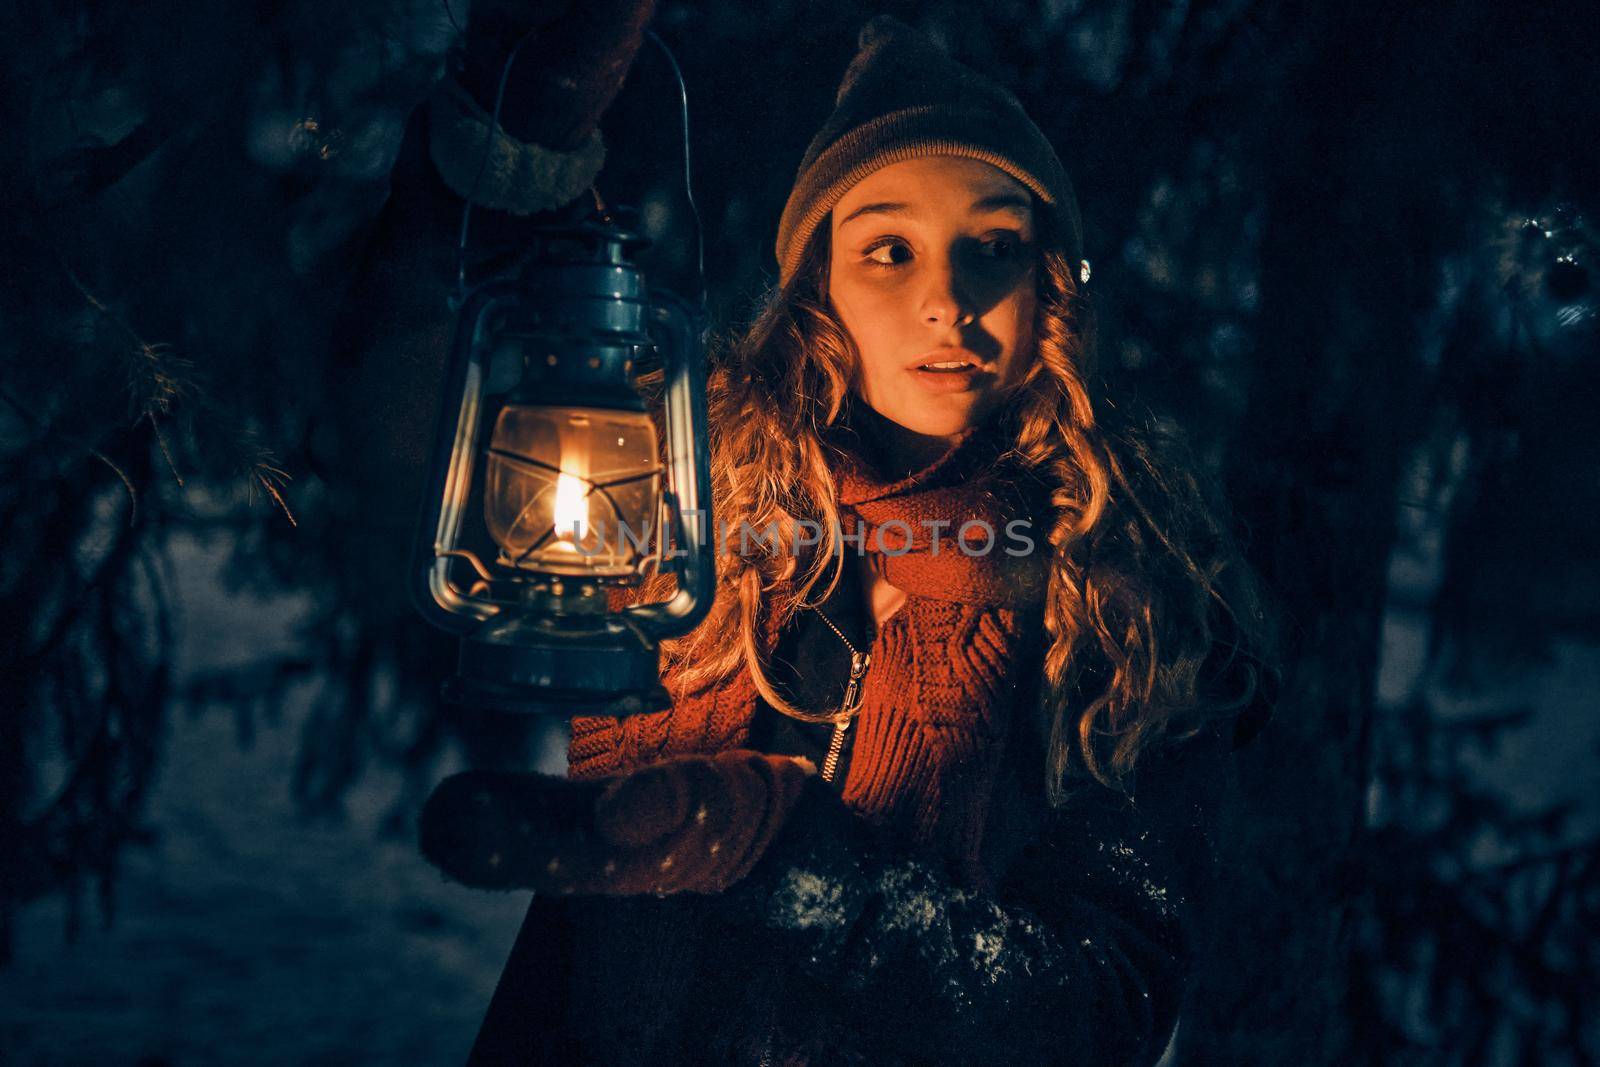 Young girl in winter forest fairy tale by snep_photo